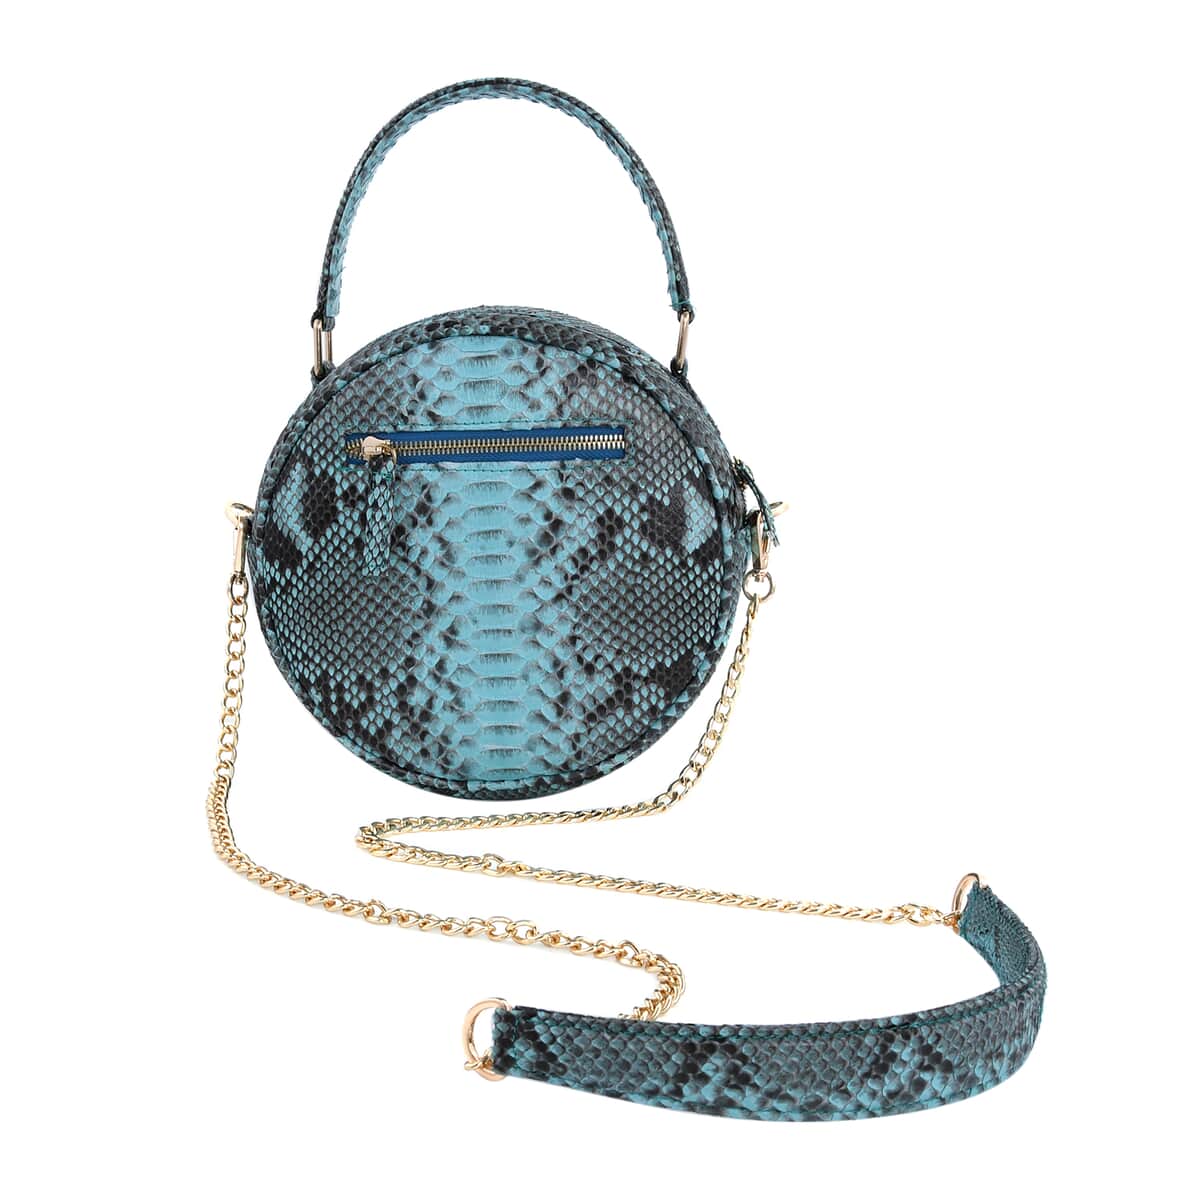 Buy The Grand Pelle Handcrafted Turquoise Genuine Python Leather Crossbody  Bag for Women , Shoulder Purse , Crossbody Handbags , Designer Crossbody ,  Leather Handbags at ShopLC.